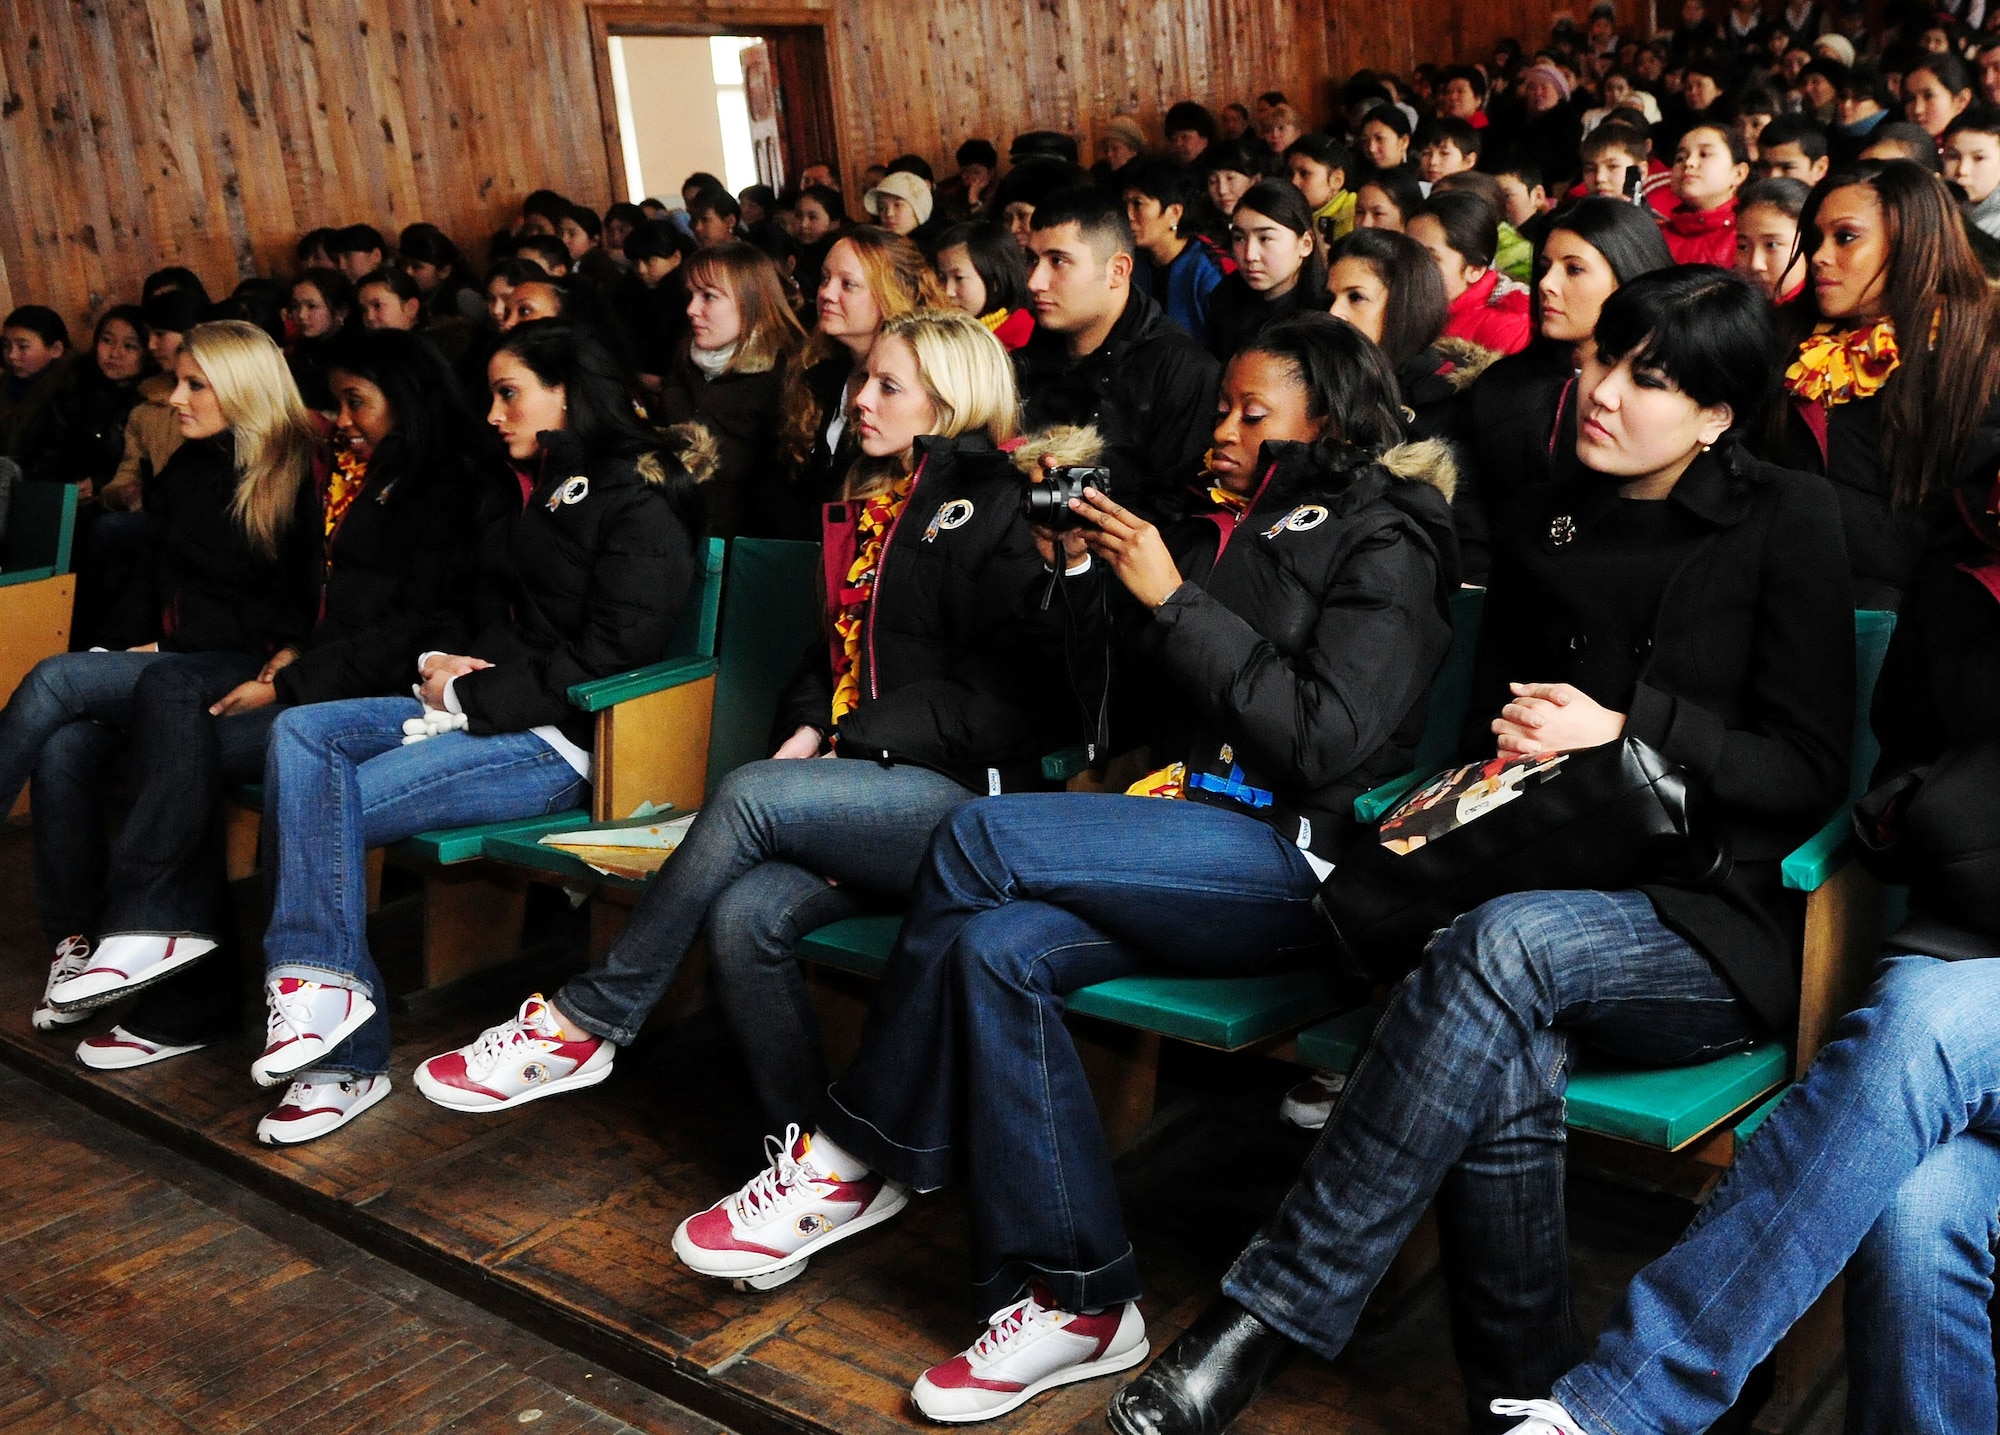 The Washington Redskins cheerleaders watch as students from the Abdraev Musical Boarding School play traditional Kyrgyz instruments in Bishkek, Kyrgyzstan, Jan. 27, 2010. The cheerleaders are on tour sponsored by the Armed Forces Entertainment. The Transit Center at Manas is their first stop in a two-week long tour where they will perform for Airmen, Soldiers, Sailors and Marines deployed overseas. (U.S. Air Force photo/Senior Airman Nichelle Anderson/Released)